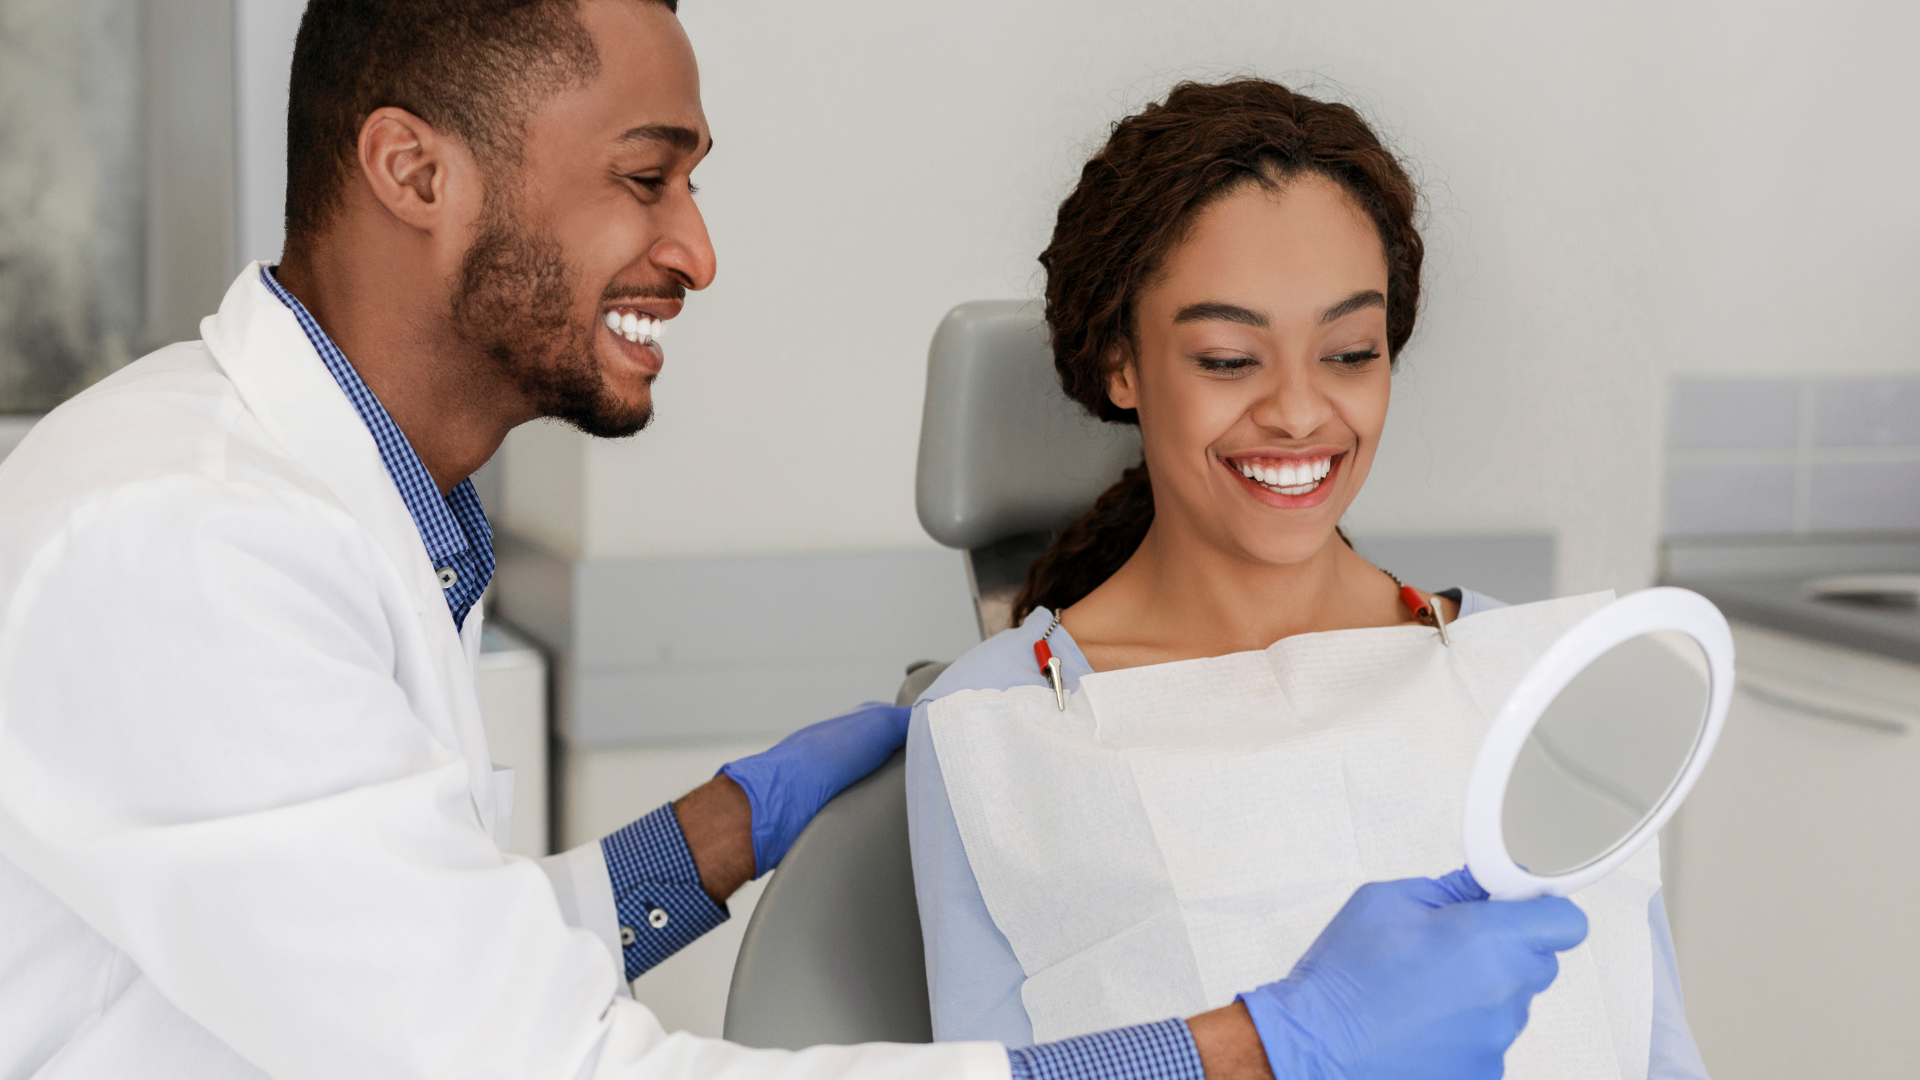 Black Dentists You Can Support In Broward County